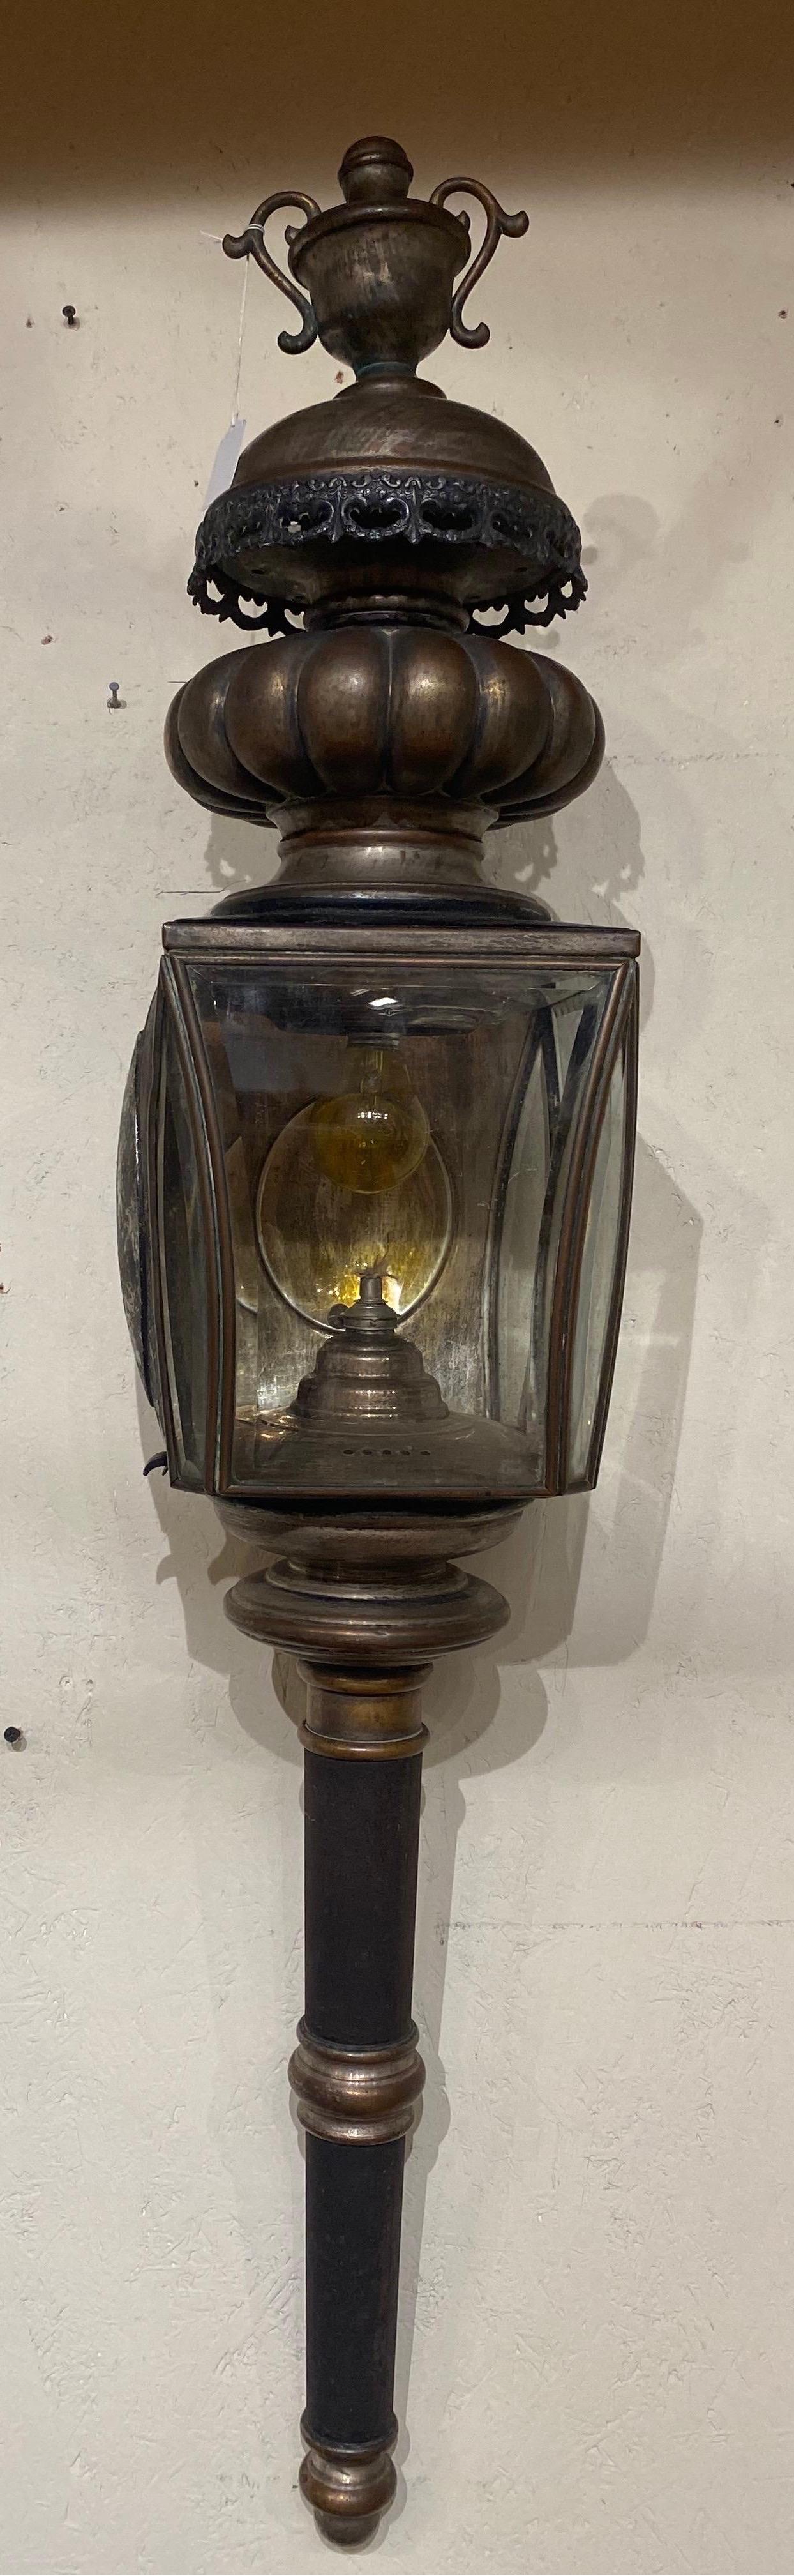 Pair of American Coach Lanterns with Urn Finials For Sale 7